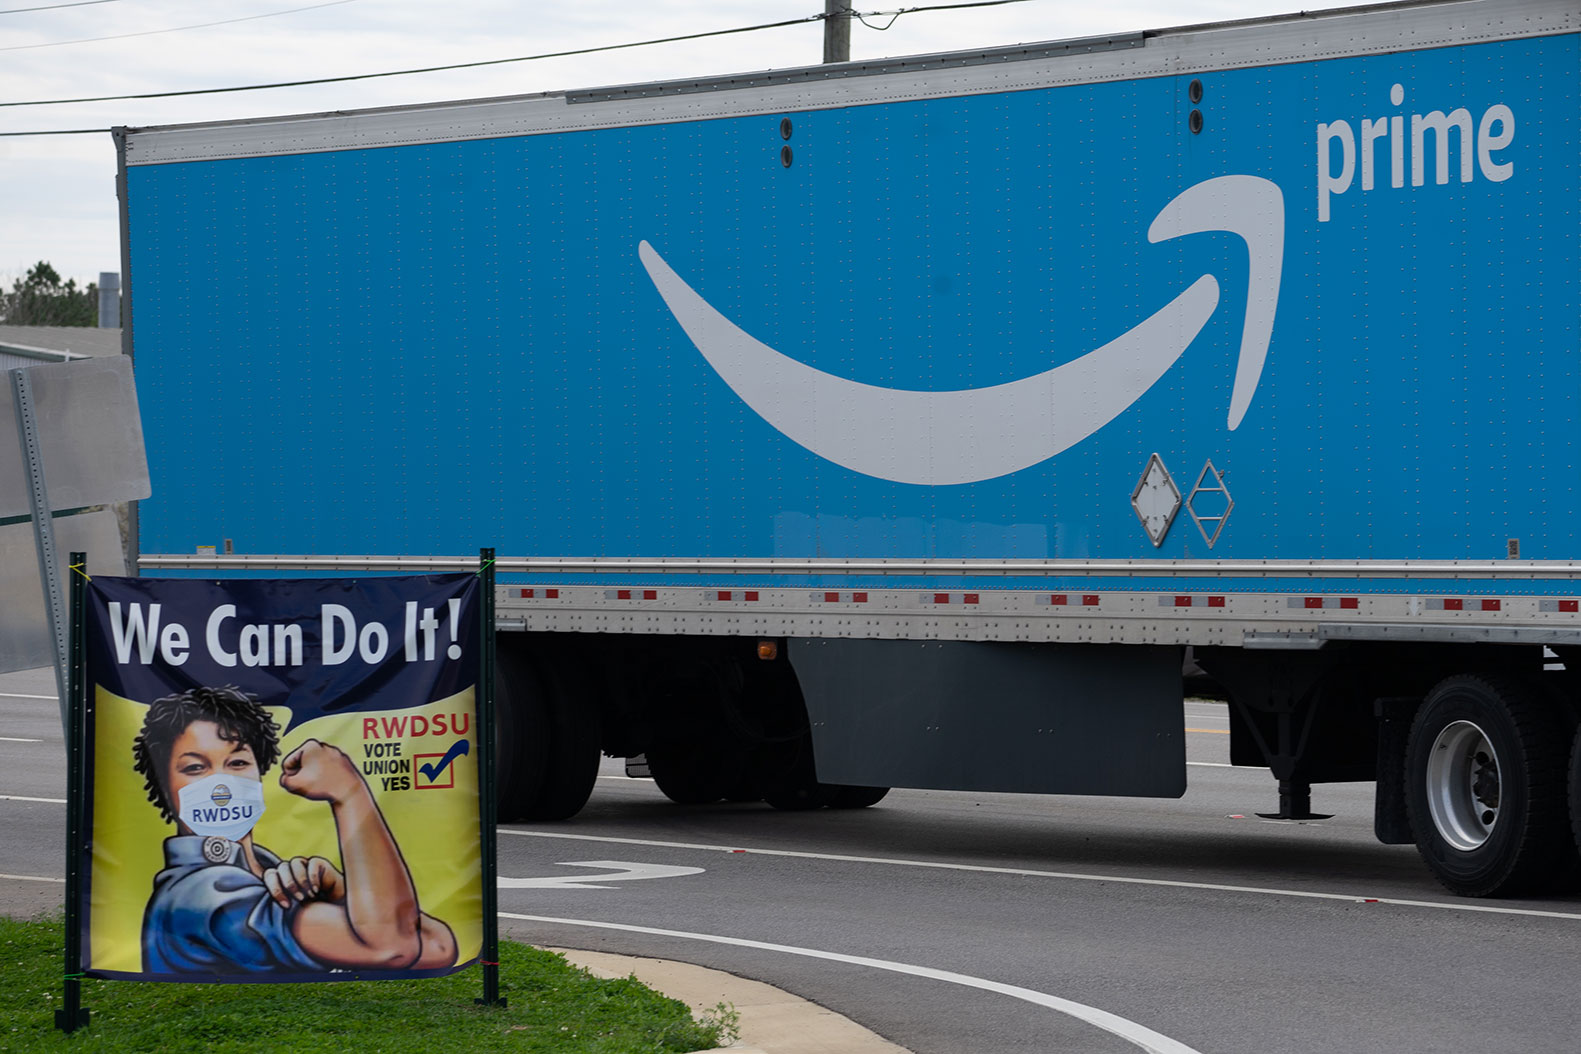 A truck passes as Congressional delegates visit the Amazon Fulfillment Center after meeting with workers and organizers involved in the Amazon BHM1 facility unionization effort